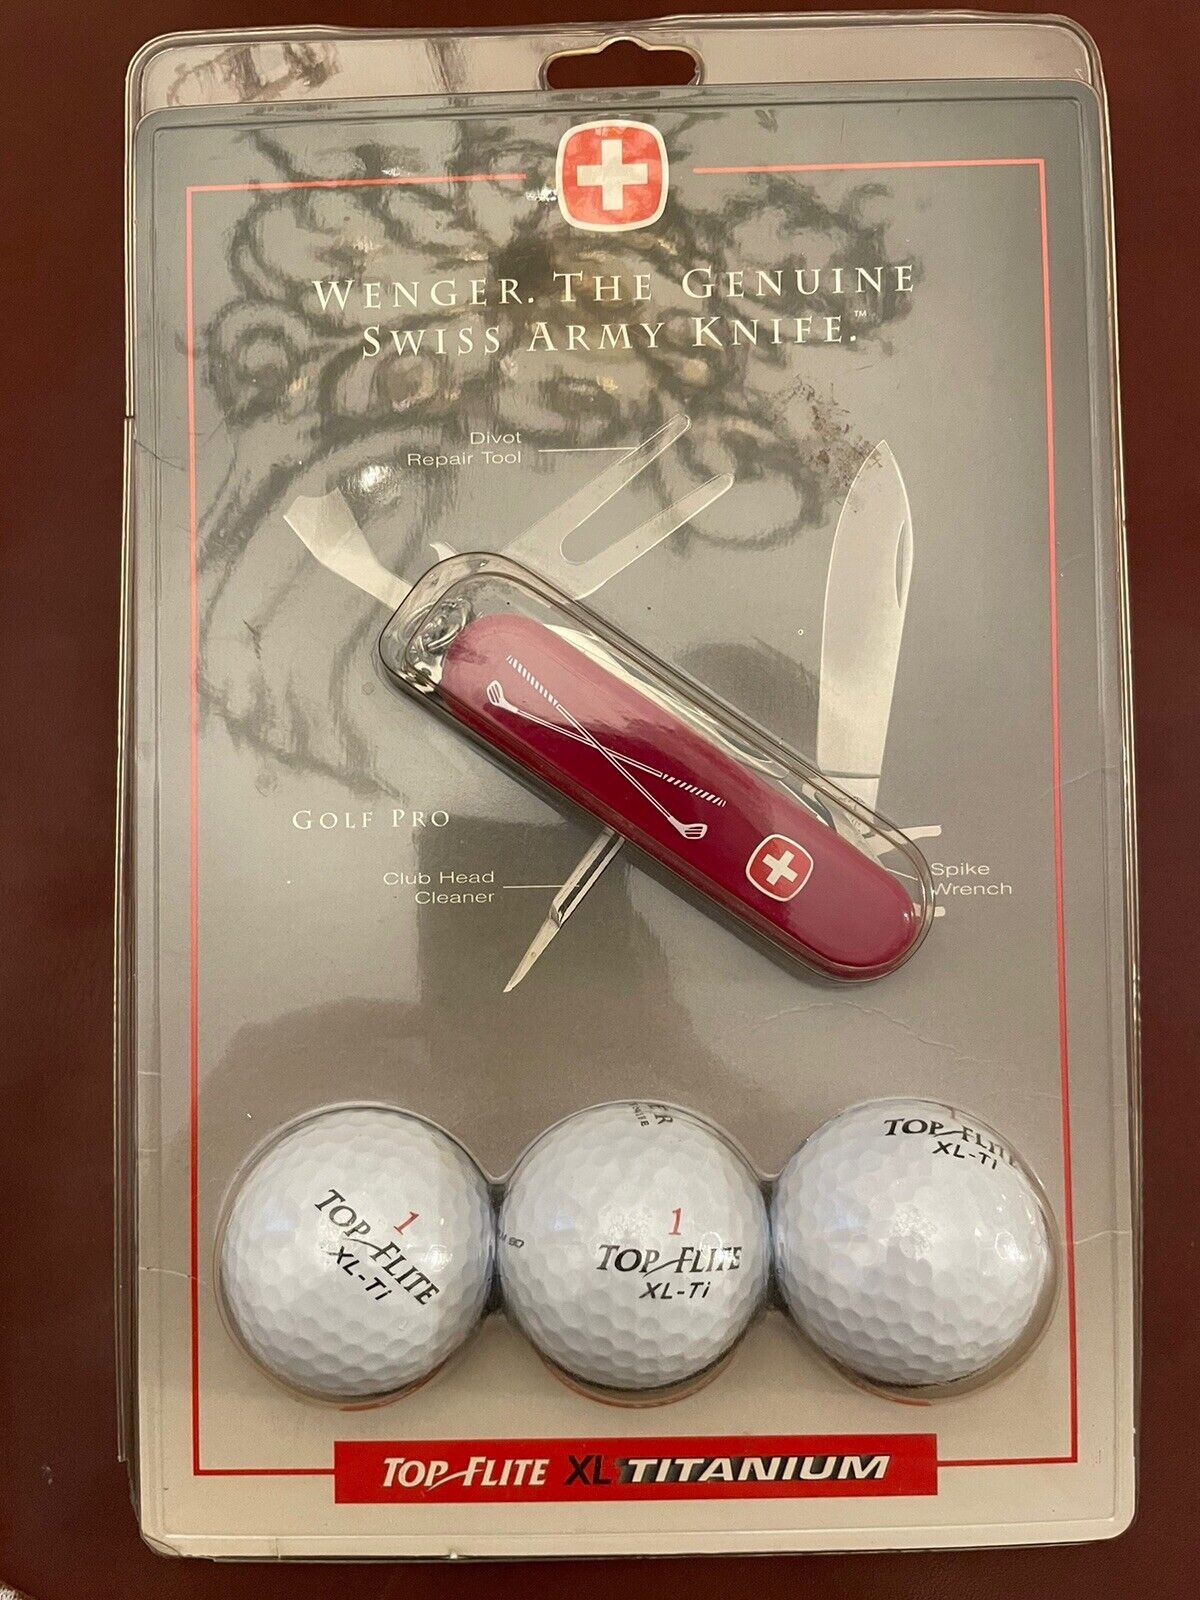 Wenger Golf Pro Swiss Army Knife With Top Flite XL-Ti Titanium Balls New In Box